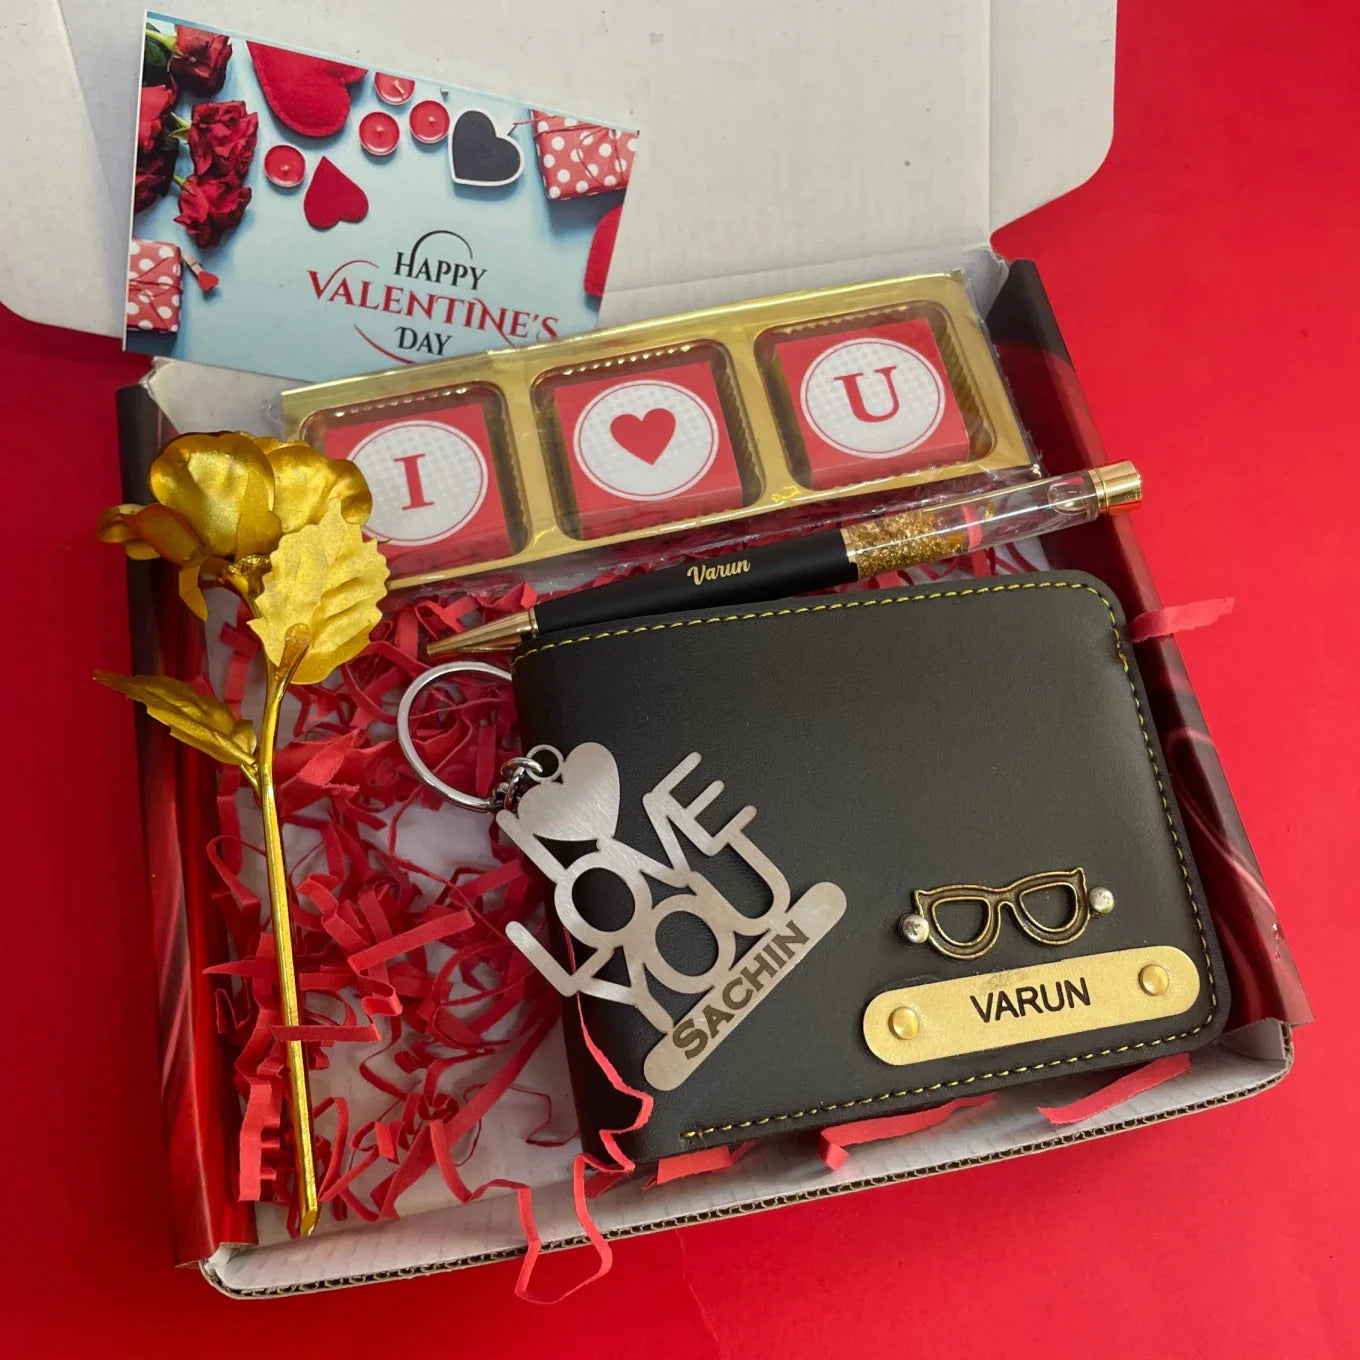 Fall in love with best customized valentine's day gifts from the incredible personalized gifting store in India. Available in affordable prices, heavy discounts and premium quality just at Your Gift Studio.